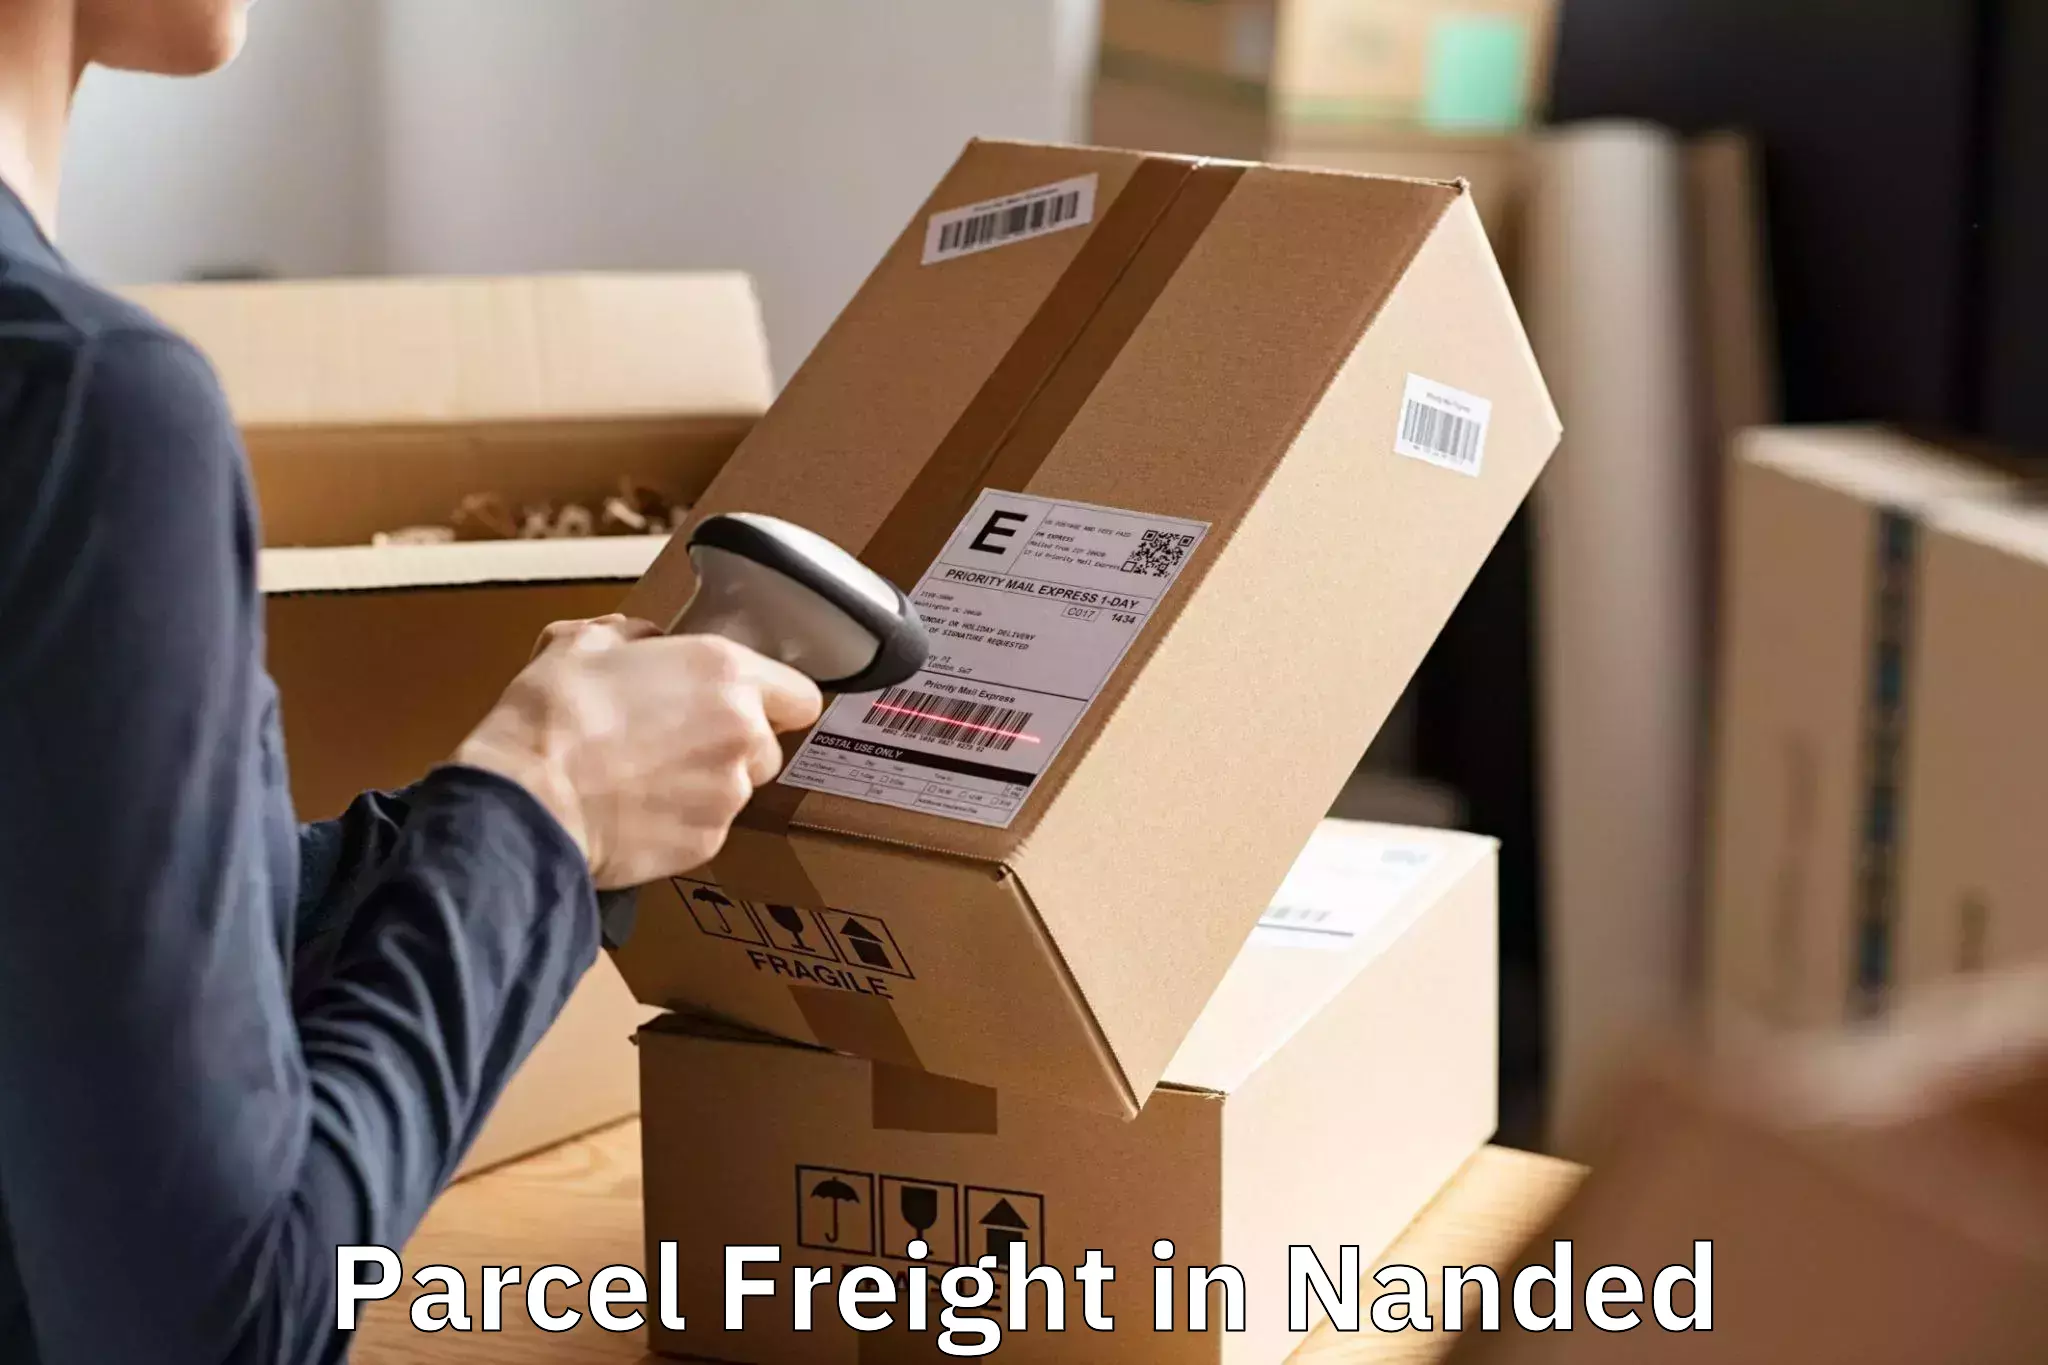 Comprehensive Parcel Freight in Nanded, Maharashtra (MH)